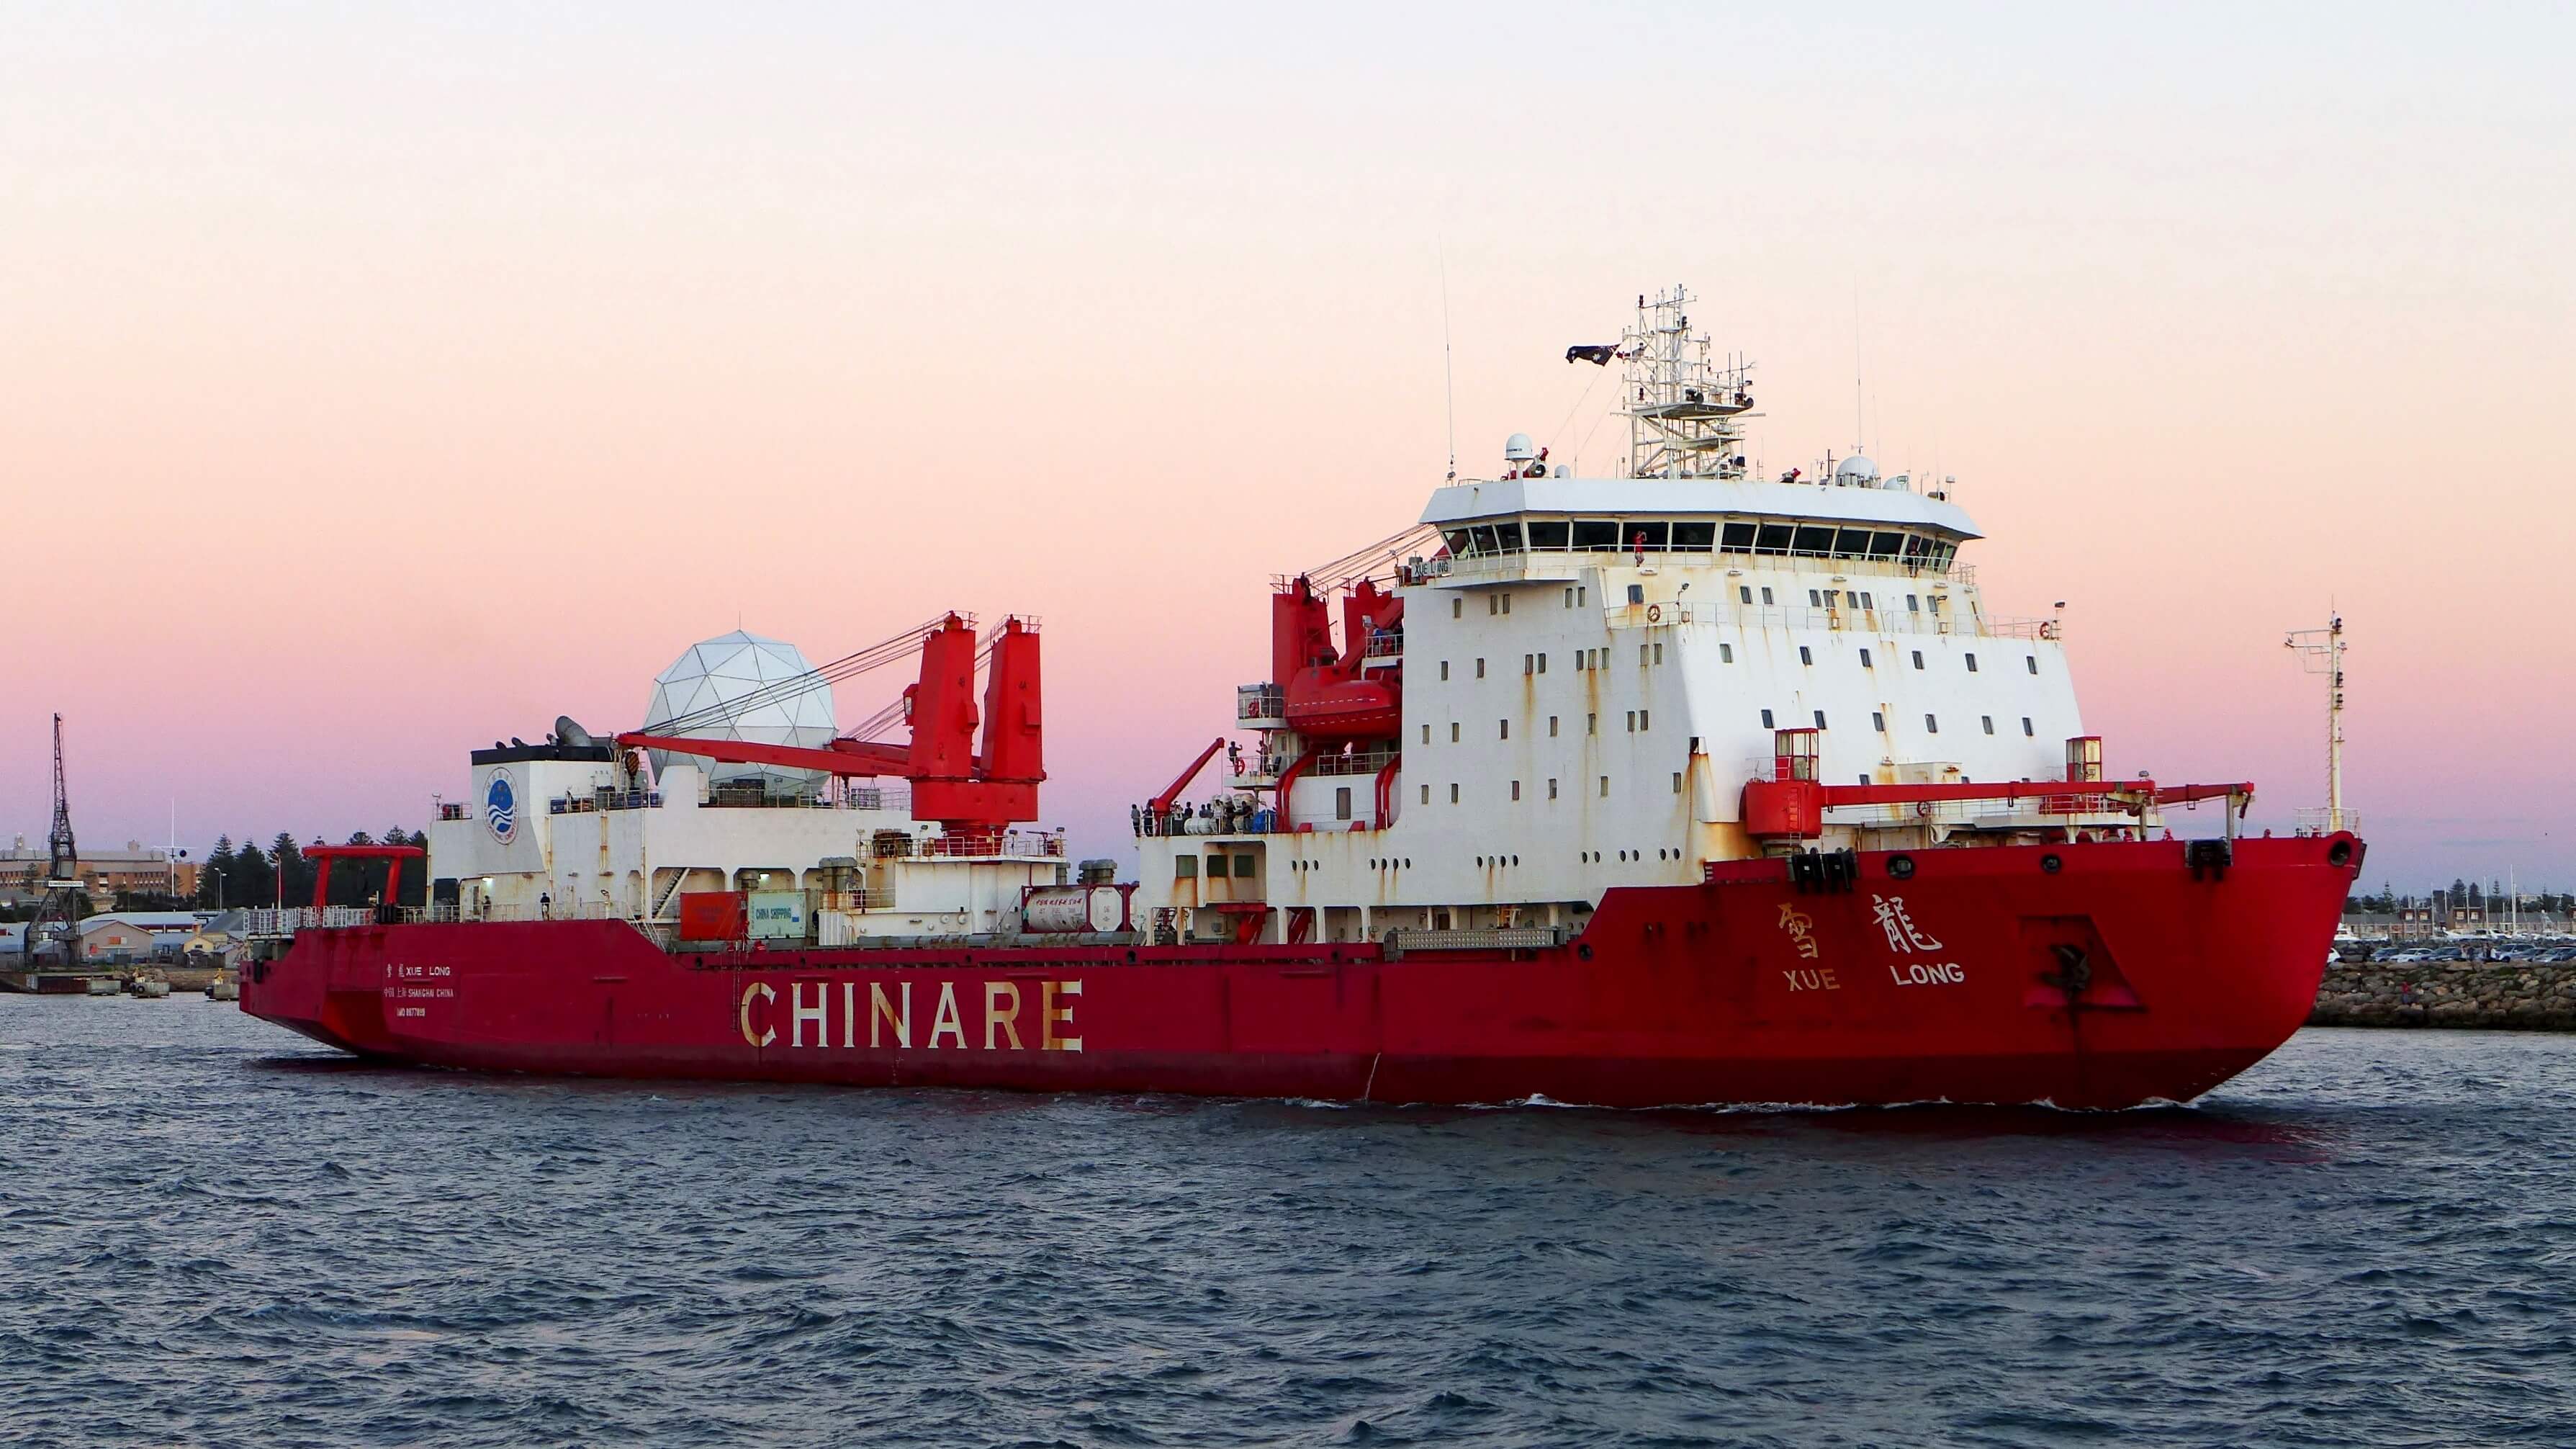 Xue Long, a Chinese icebreaker, departing from the inner harbour of the Port of Fremantle, Western Australia, on her way back to her port of registry, Shanghai, China, after a visit to Antarctica, 28 March 2016 © Bahnfrend, Wikimedia